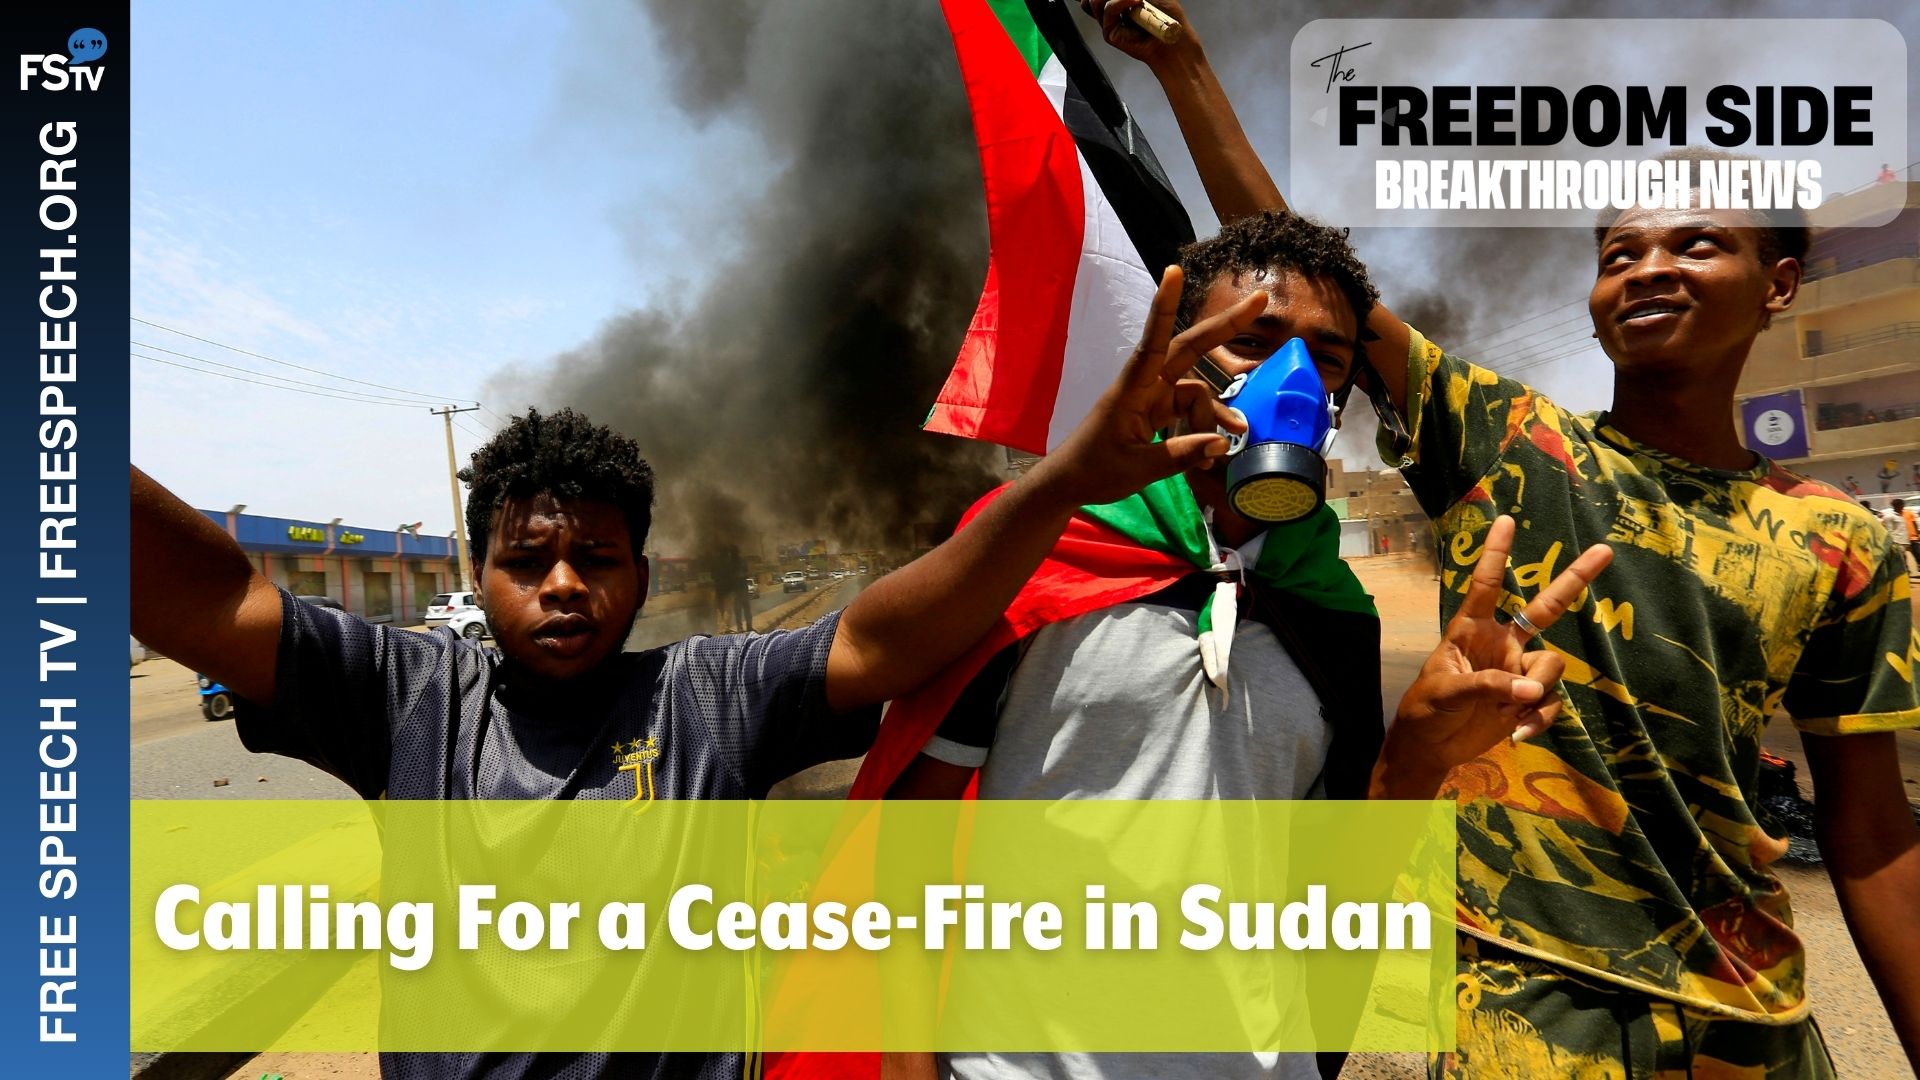 BreakThrough News | Calling For a Cease-Fire in Sudan